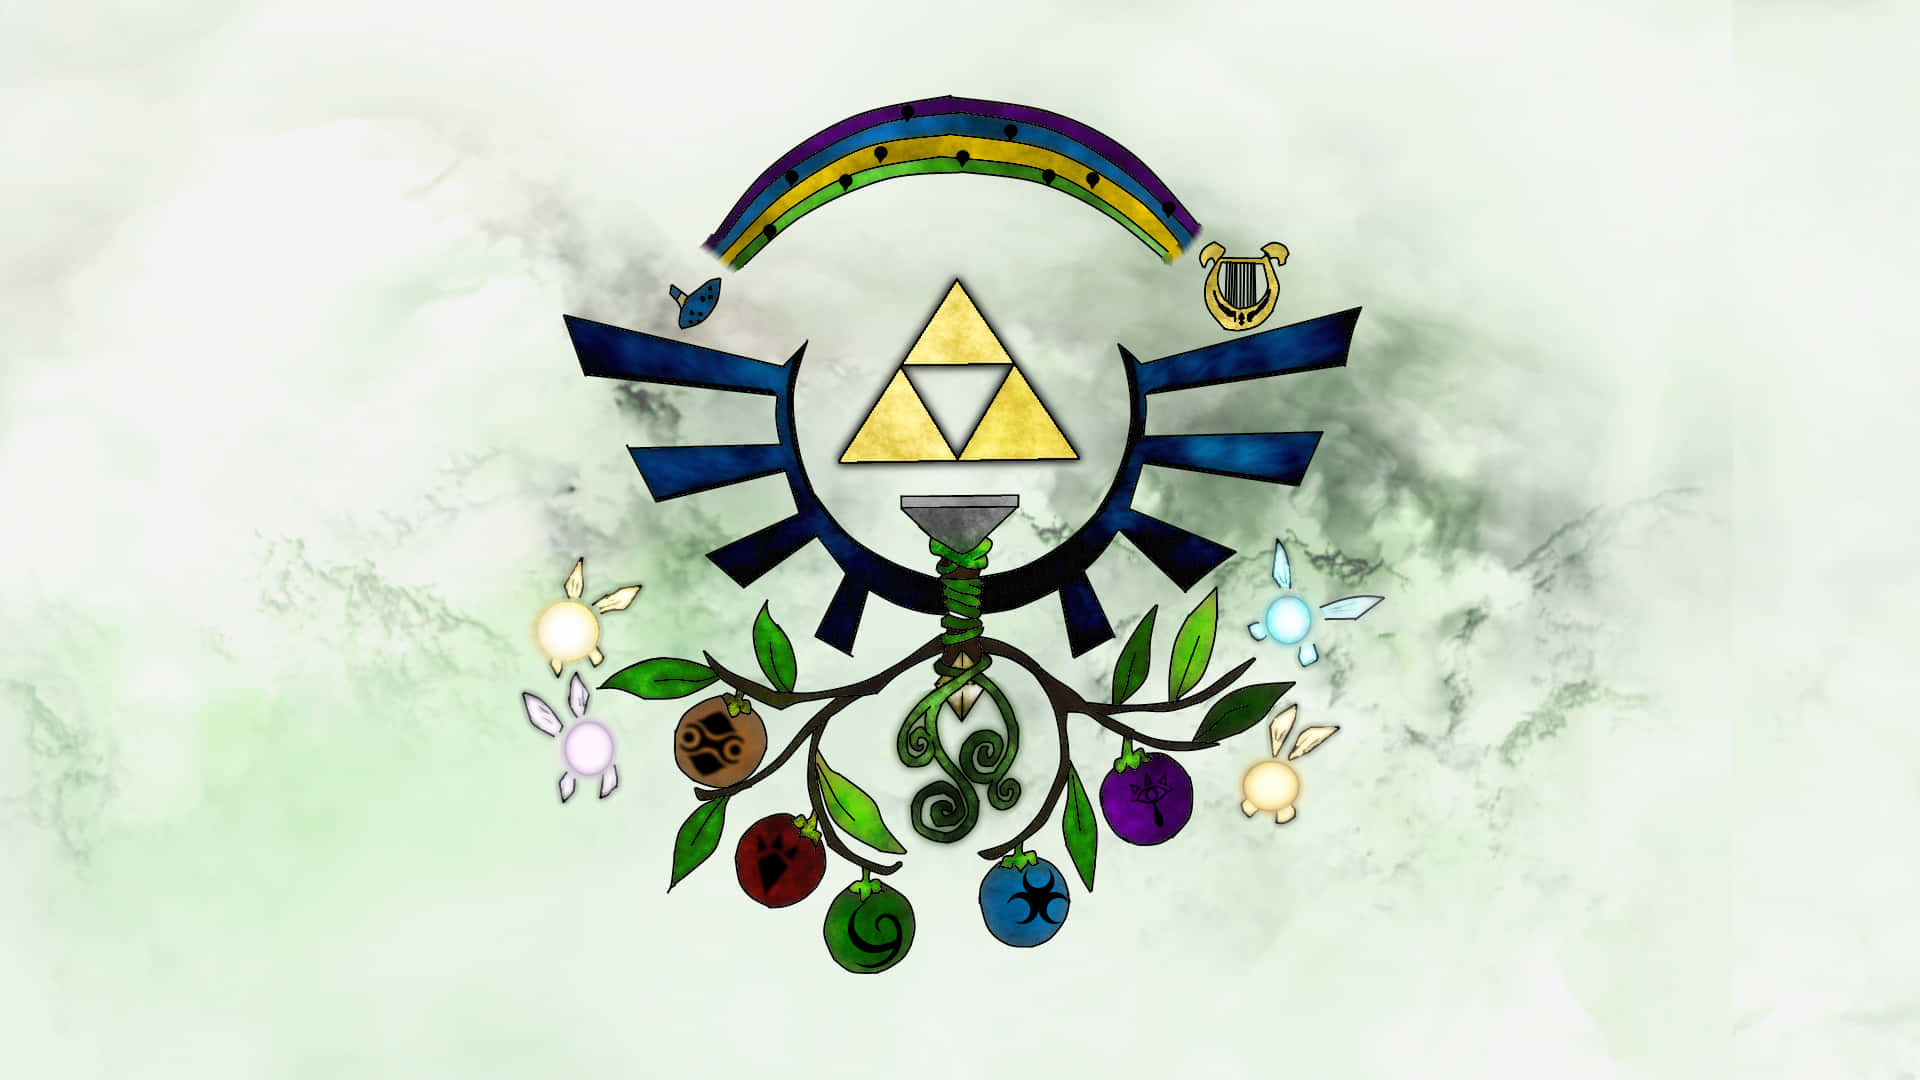 The Legend Of Zelda Logo With A Tree And A Symbol Background